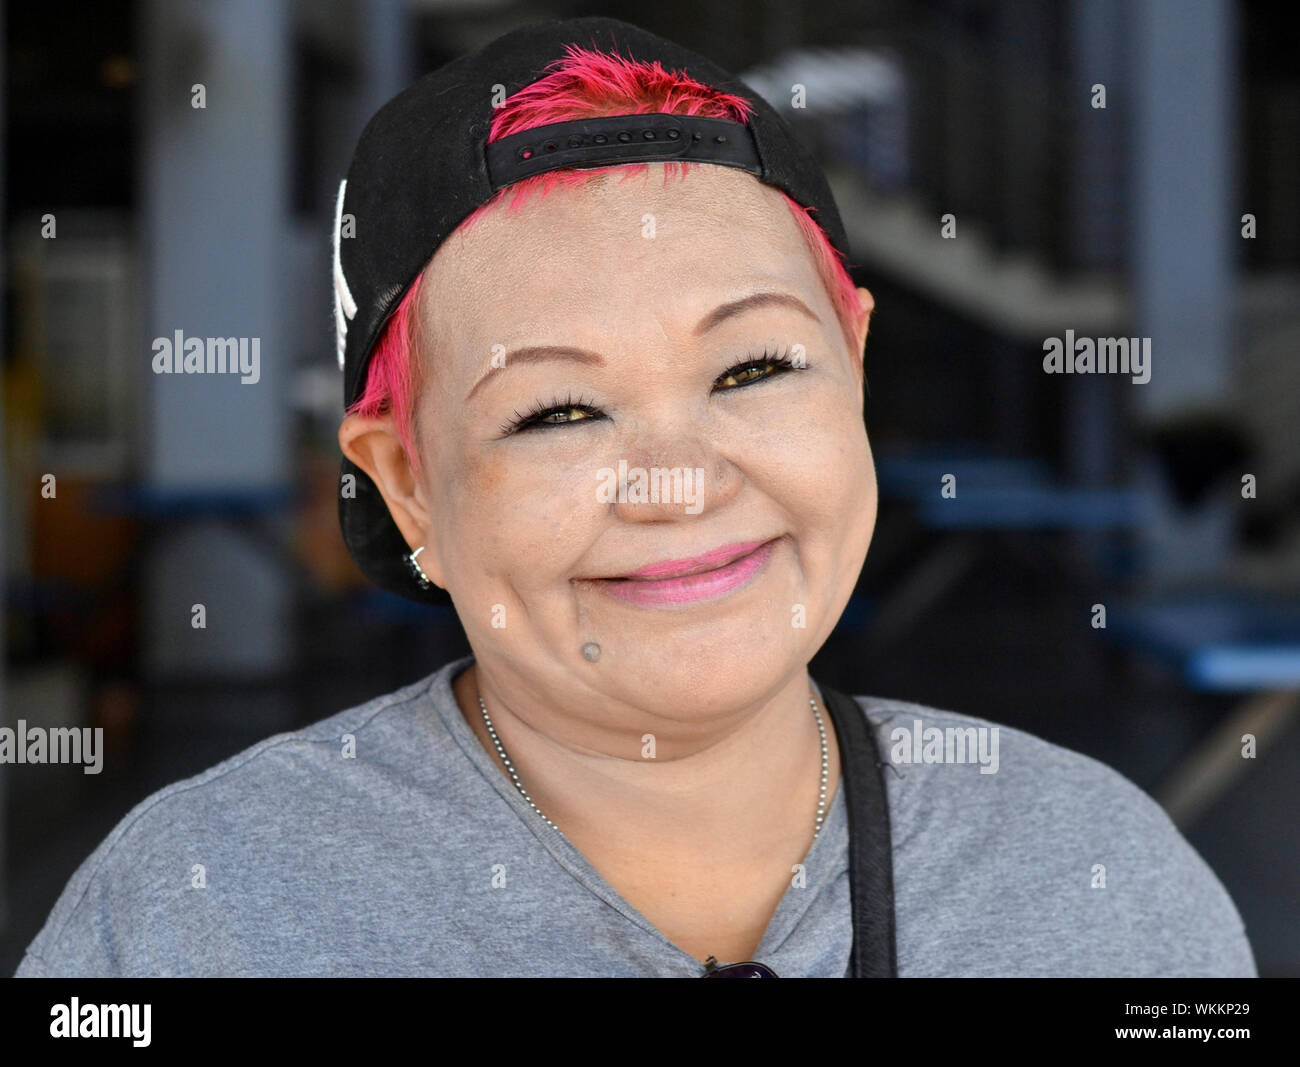 Malaysian Chinese woman with red dyed hair wears a reversed baseball cap and distinctive eye make-up and smiles for the camera. Stock Photo